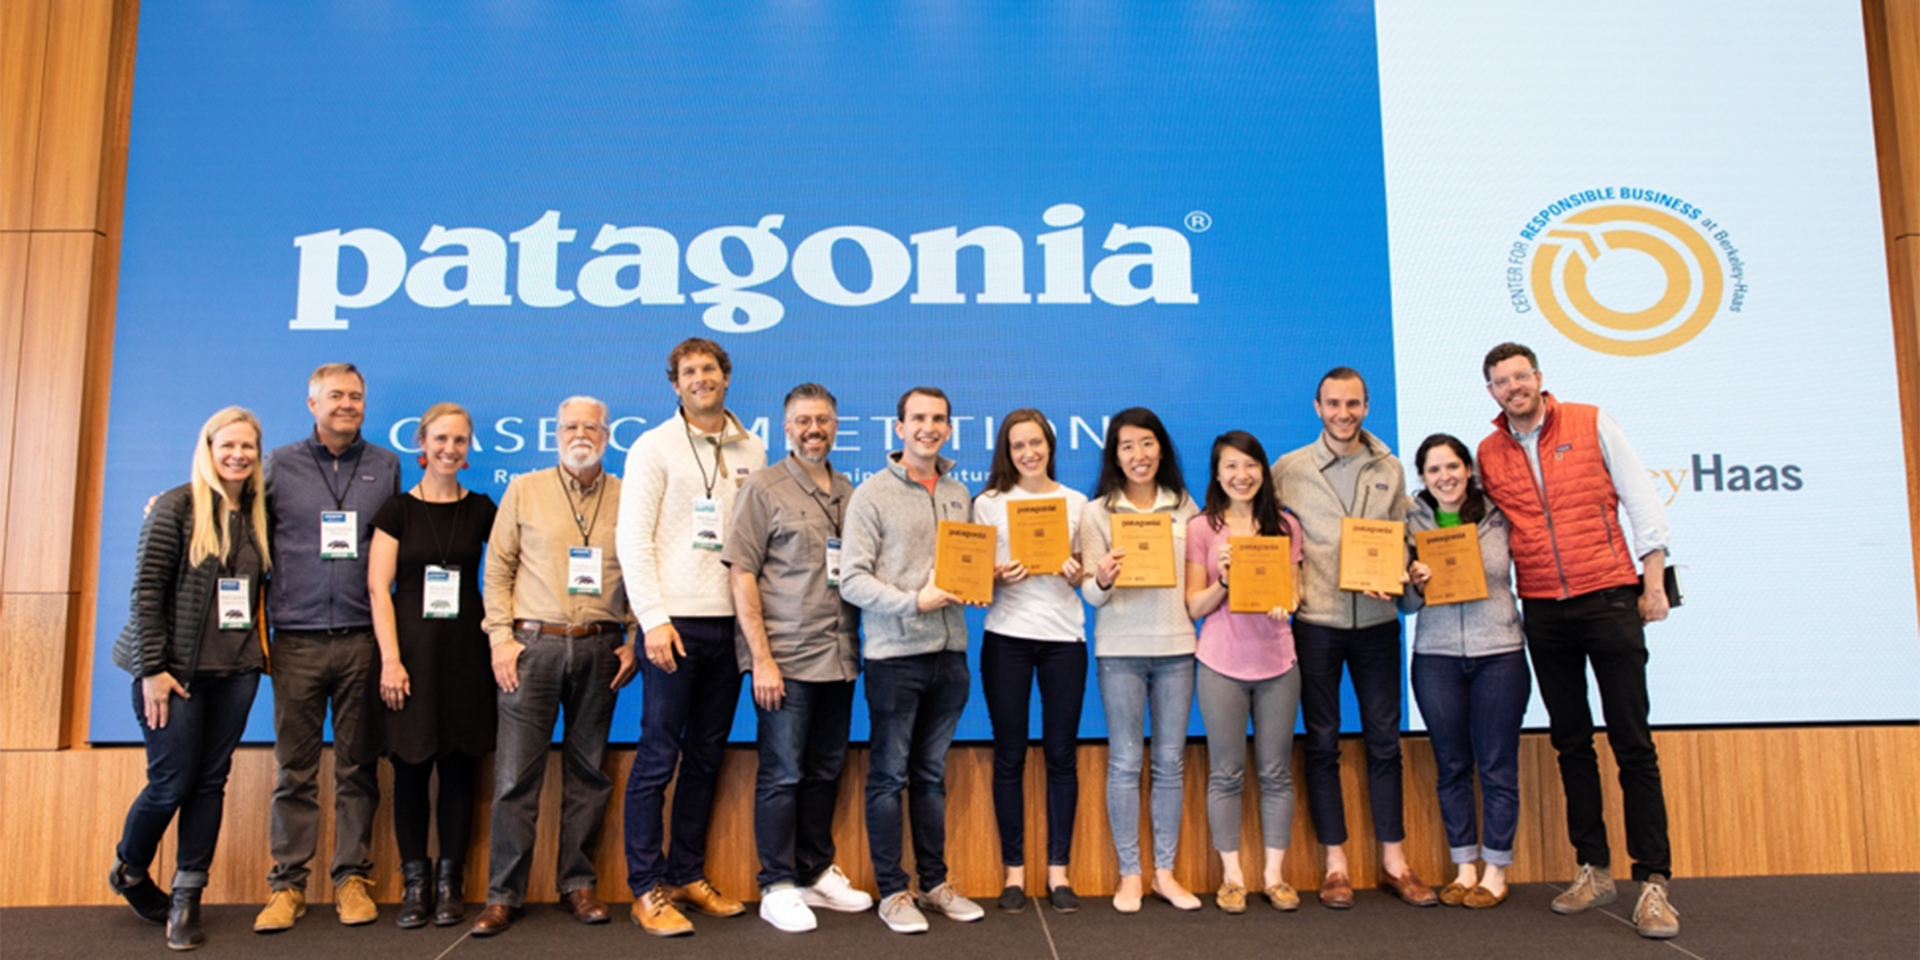 Graduate student Audrey Bazerghi and PhD student Cherry Gao win first place in Patagonia Case Competition